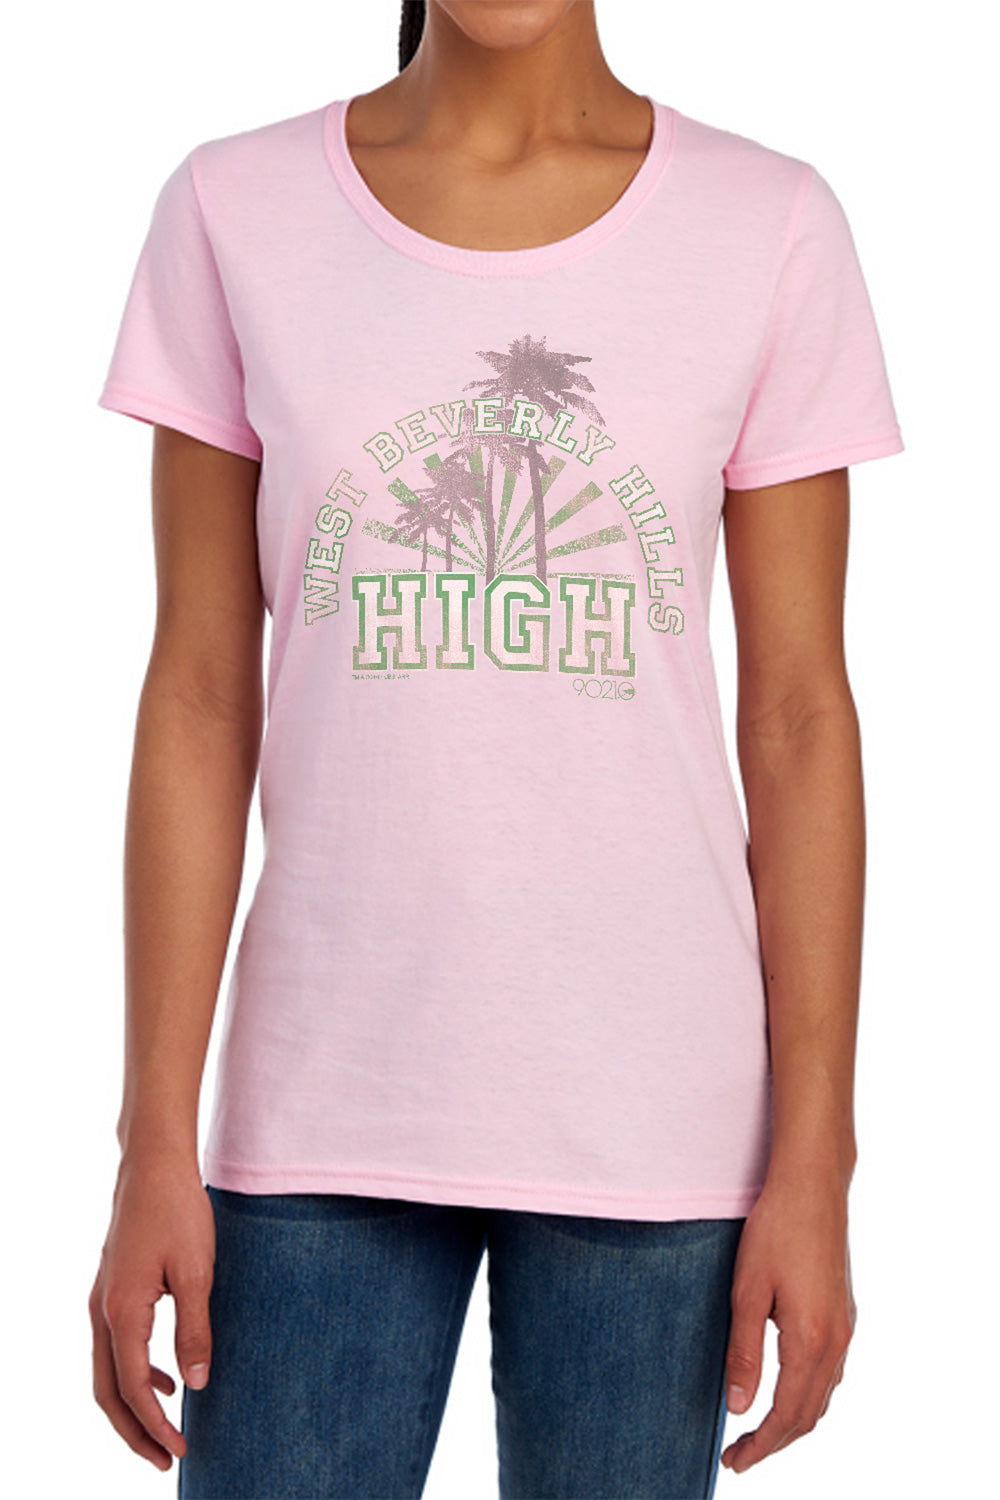 90210 : WEST BEVERLY HILLS HIGH S\S WOMENS TEE PINK SM